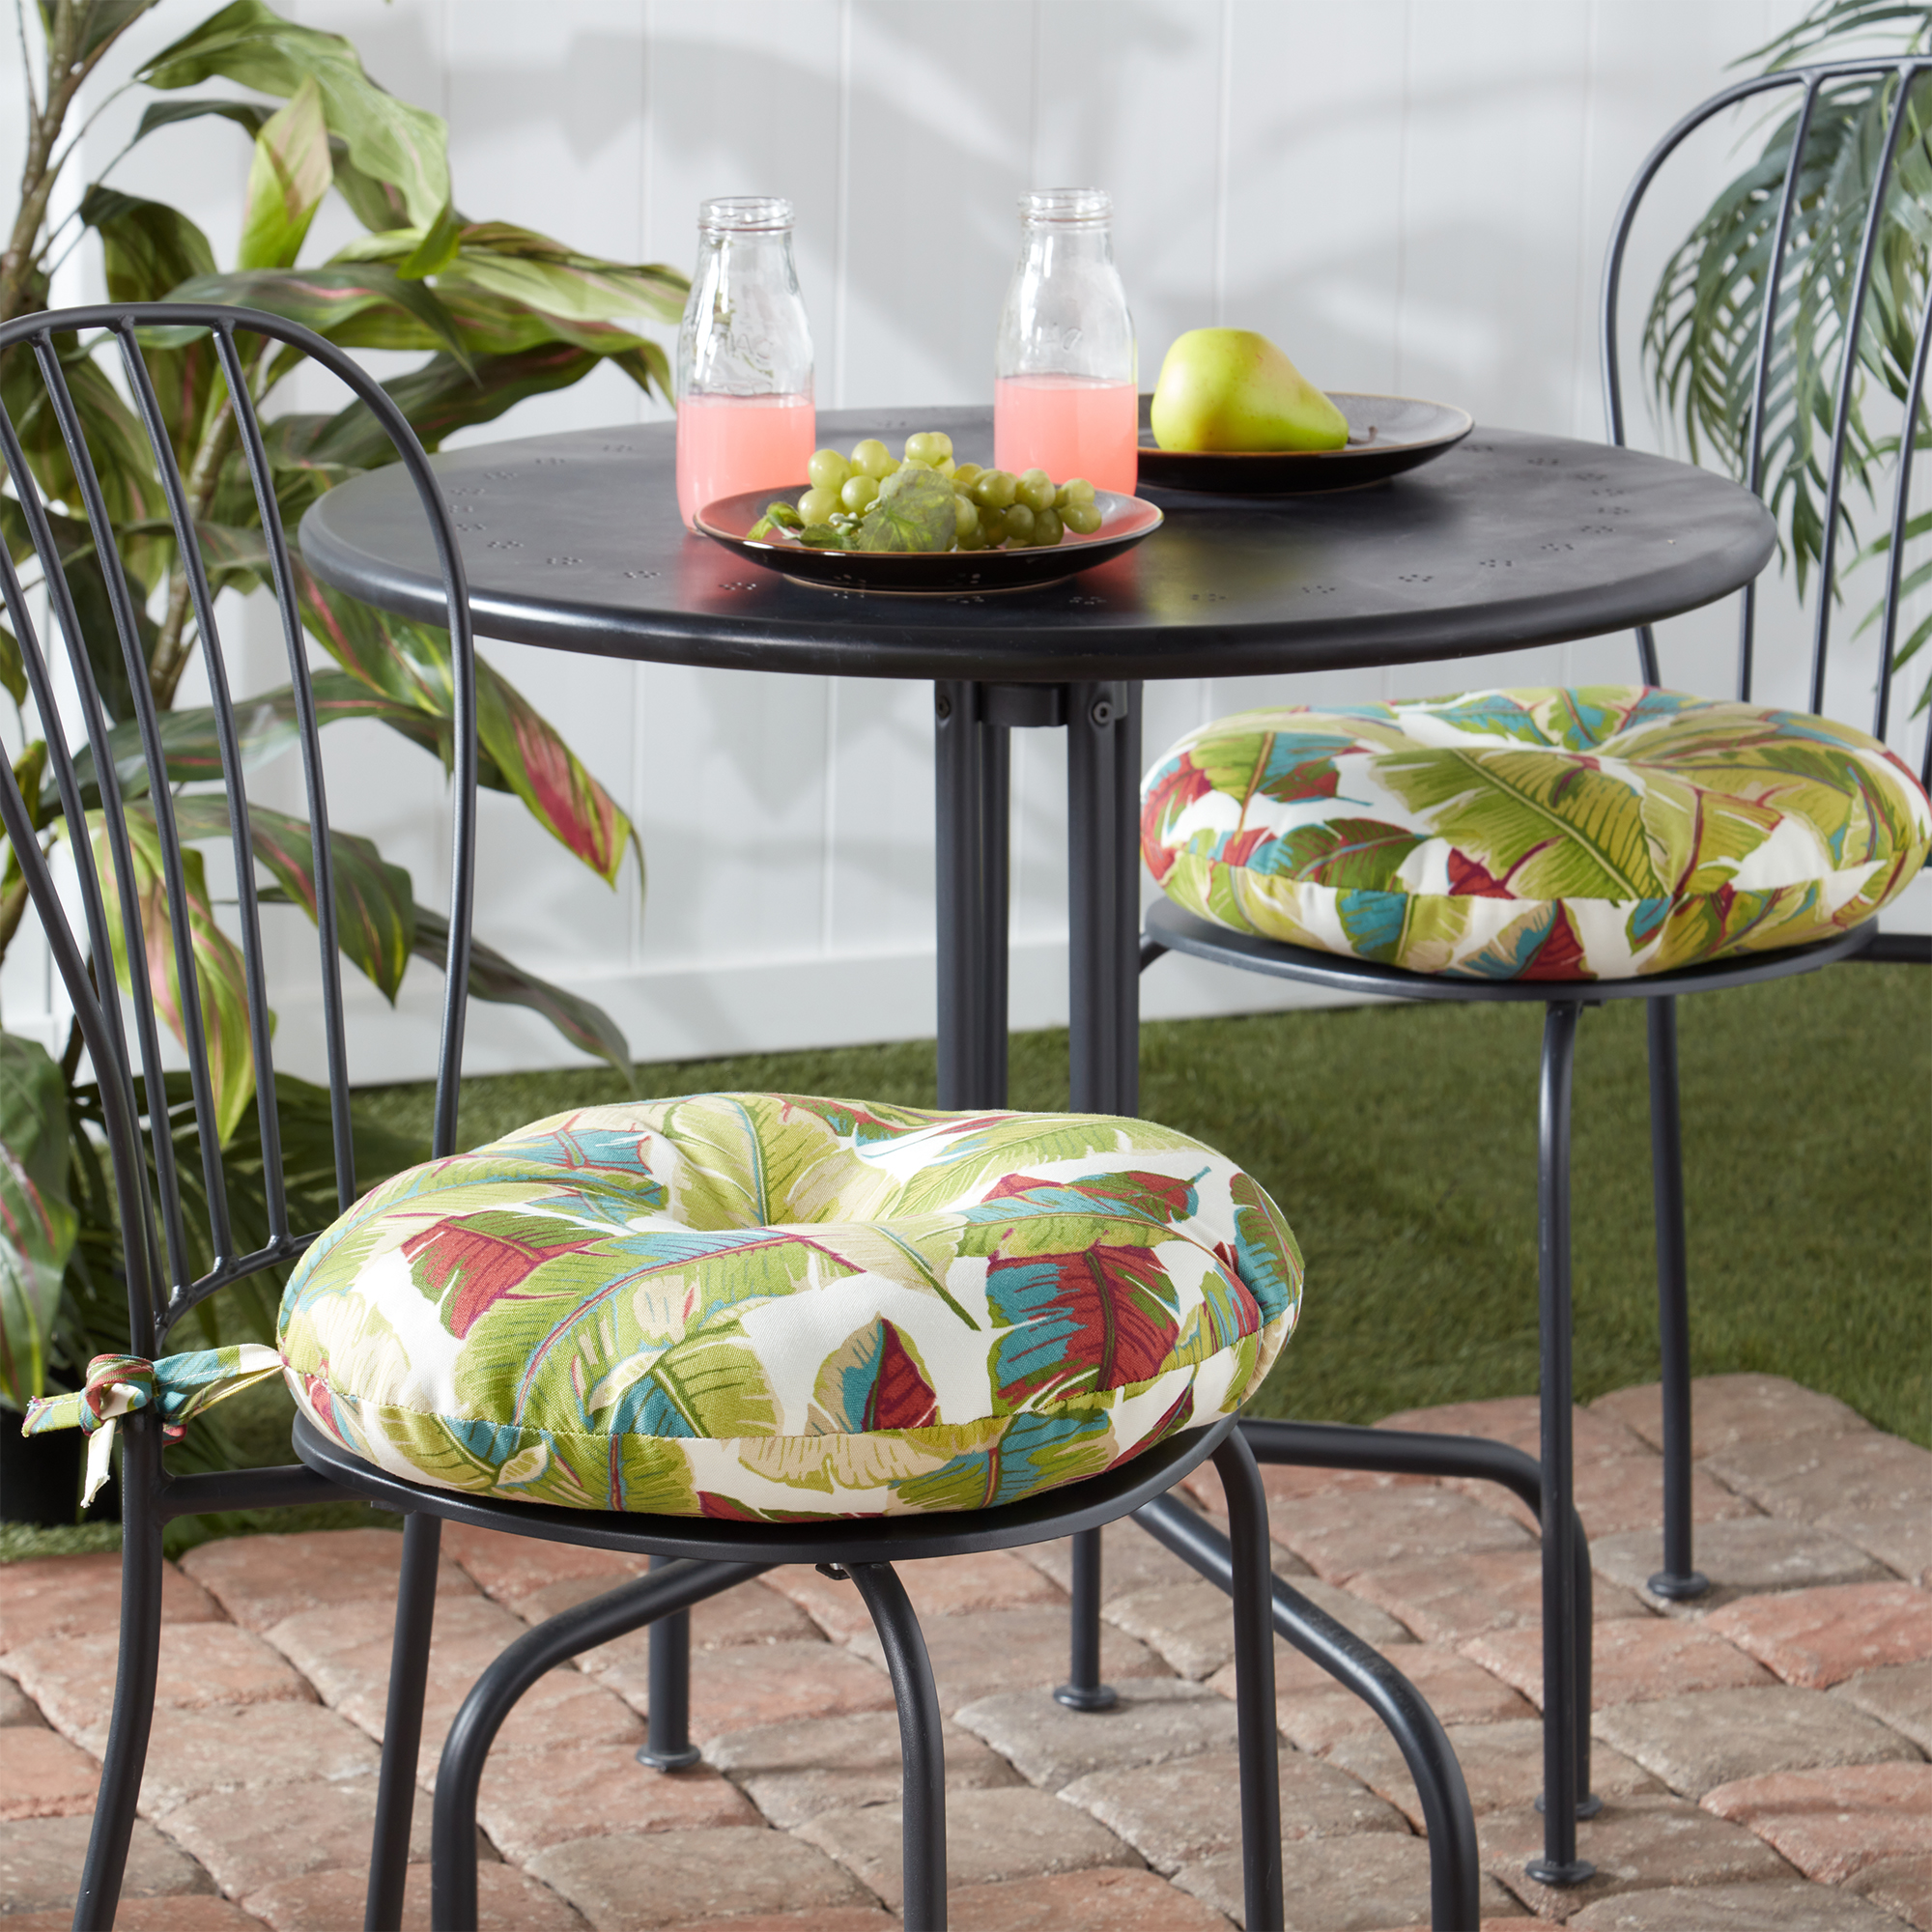 Greendale Home Fashions Palm Leaves Multicolor 15 in. Round Outdoor Reversible Bistro Seat Cushion (Set of 2) - image 2 of 5